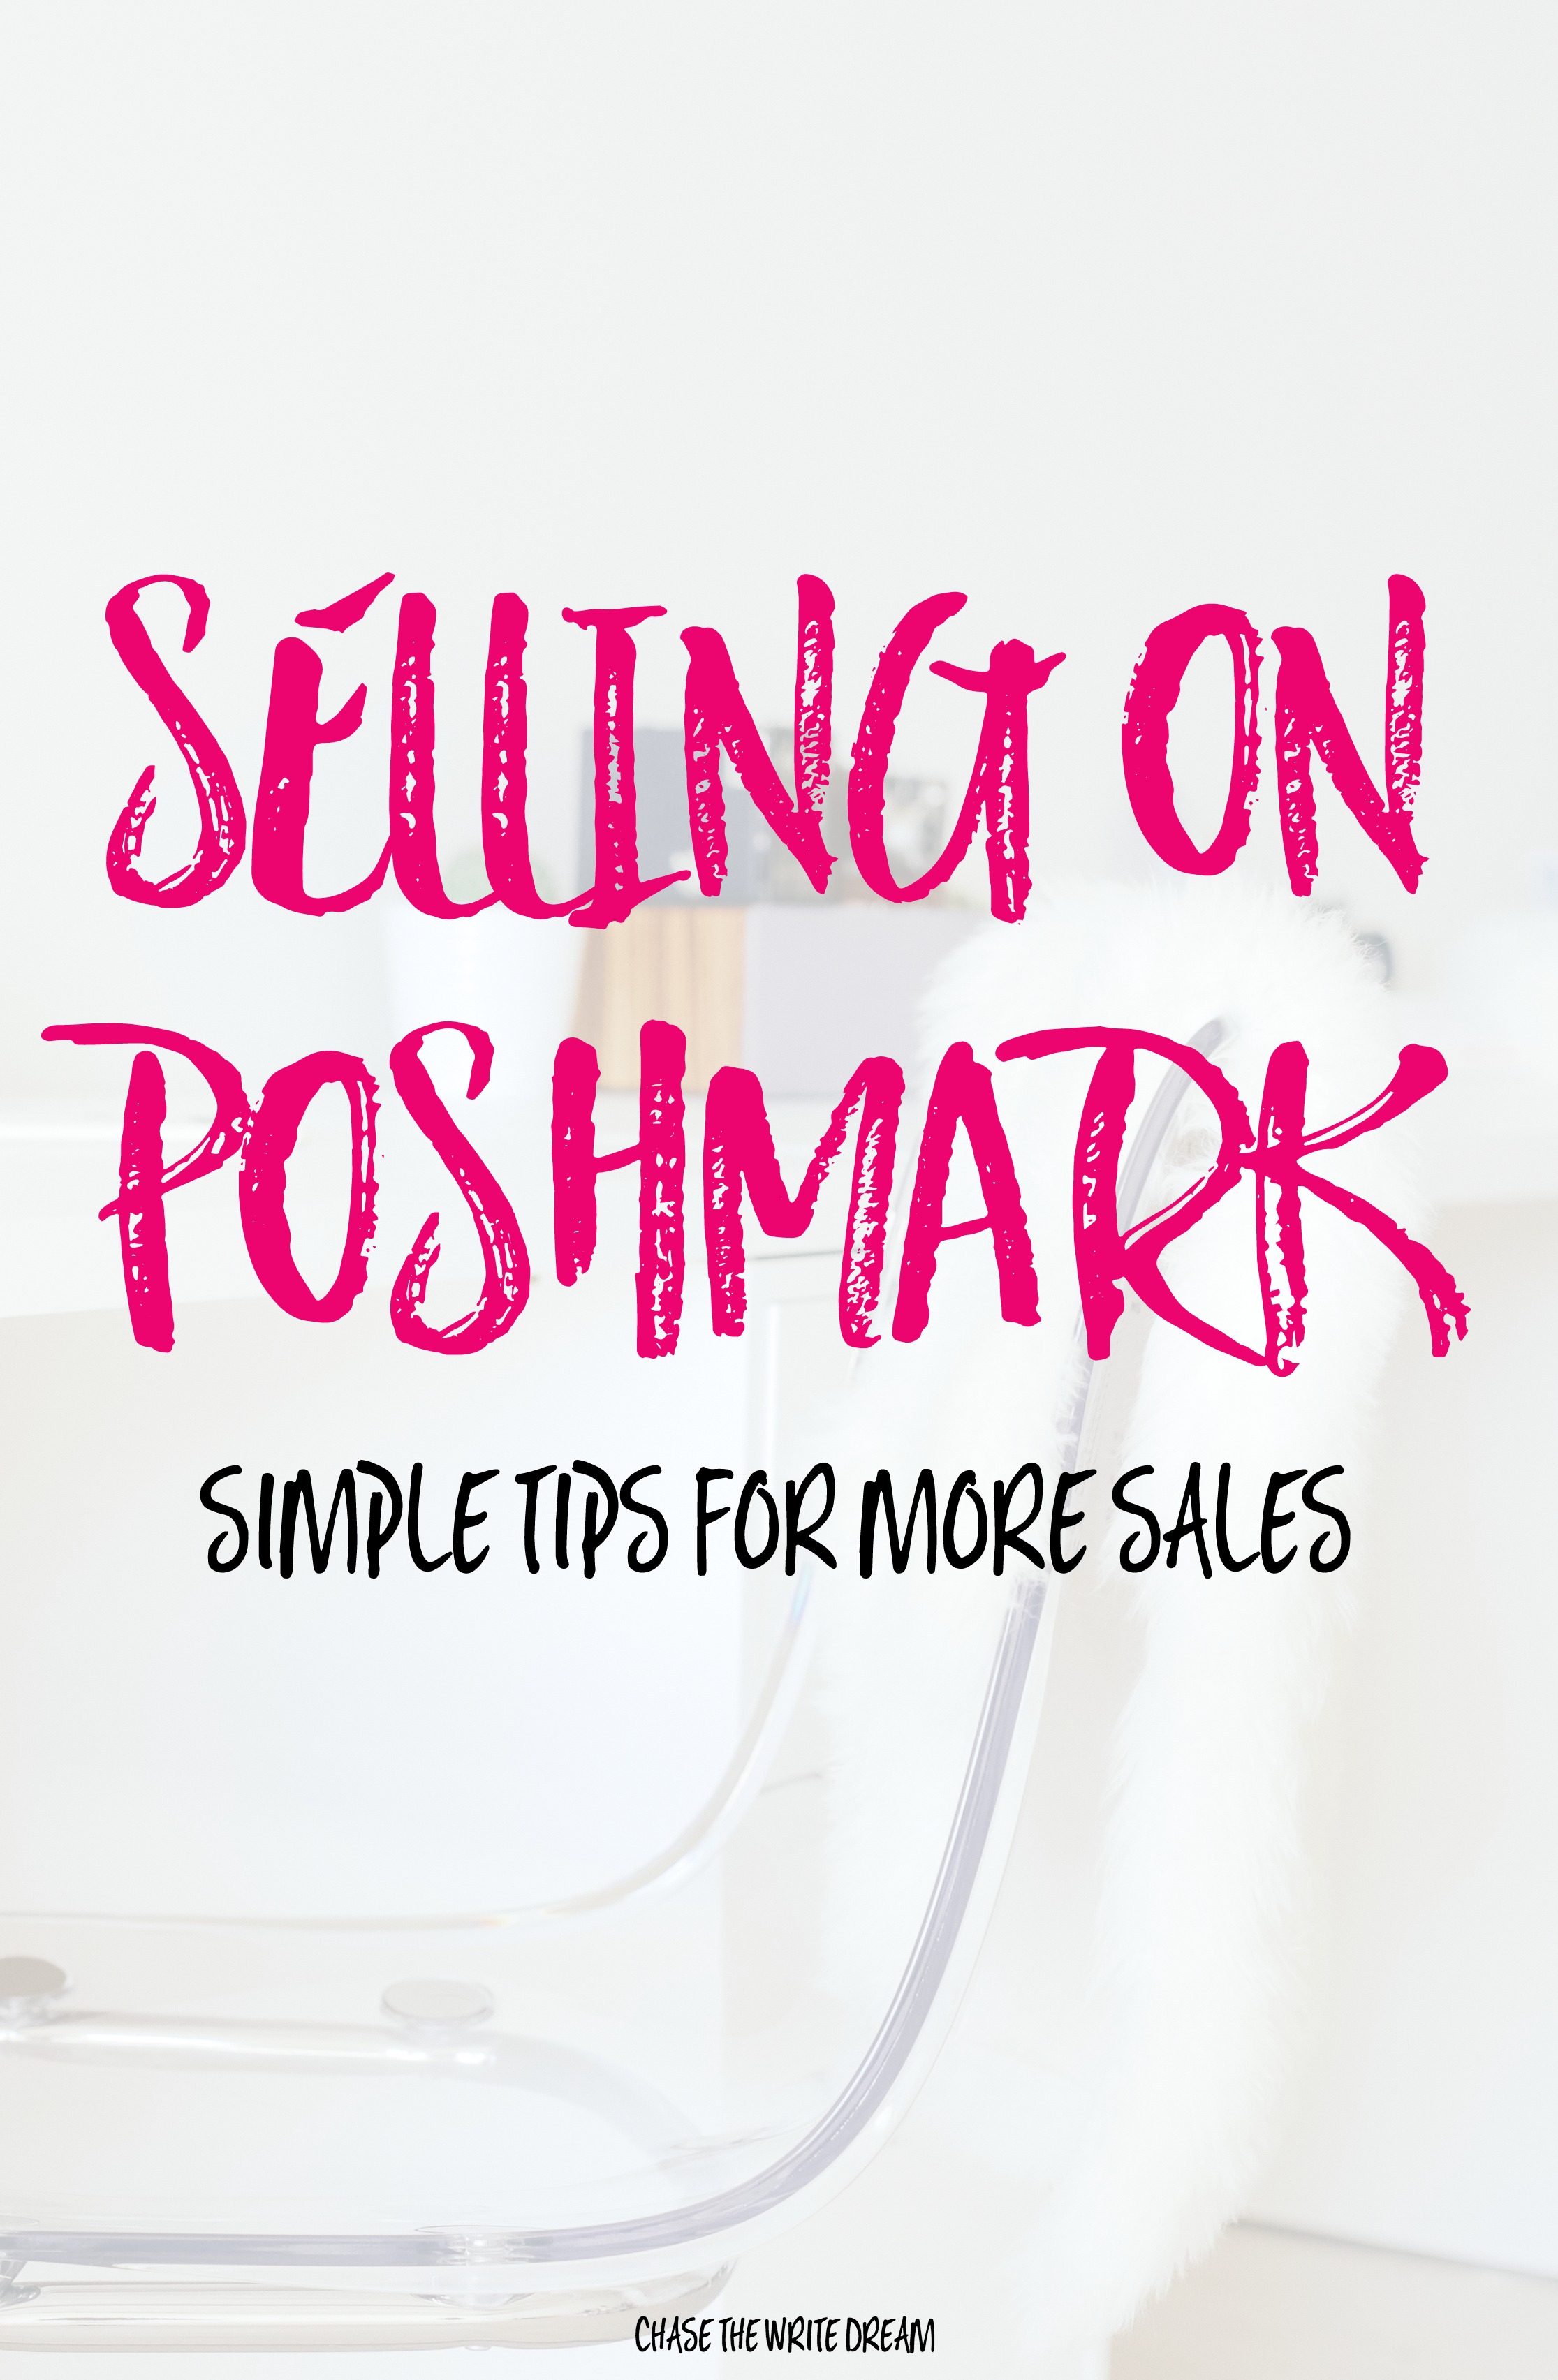 Is Poshmark Legit? Protect Yourself When Buying and 